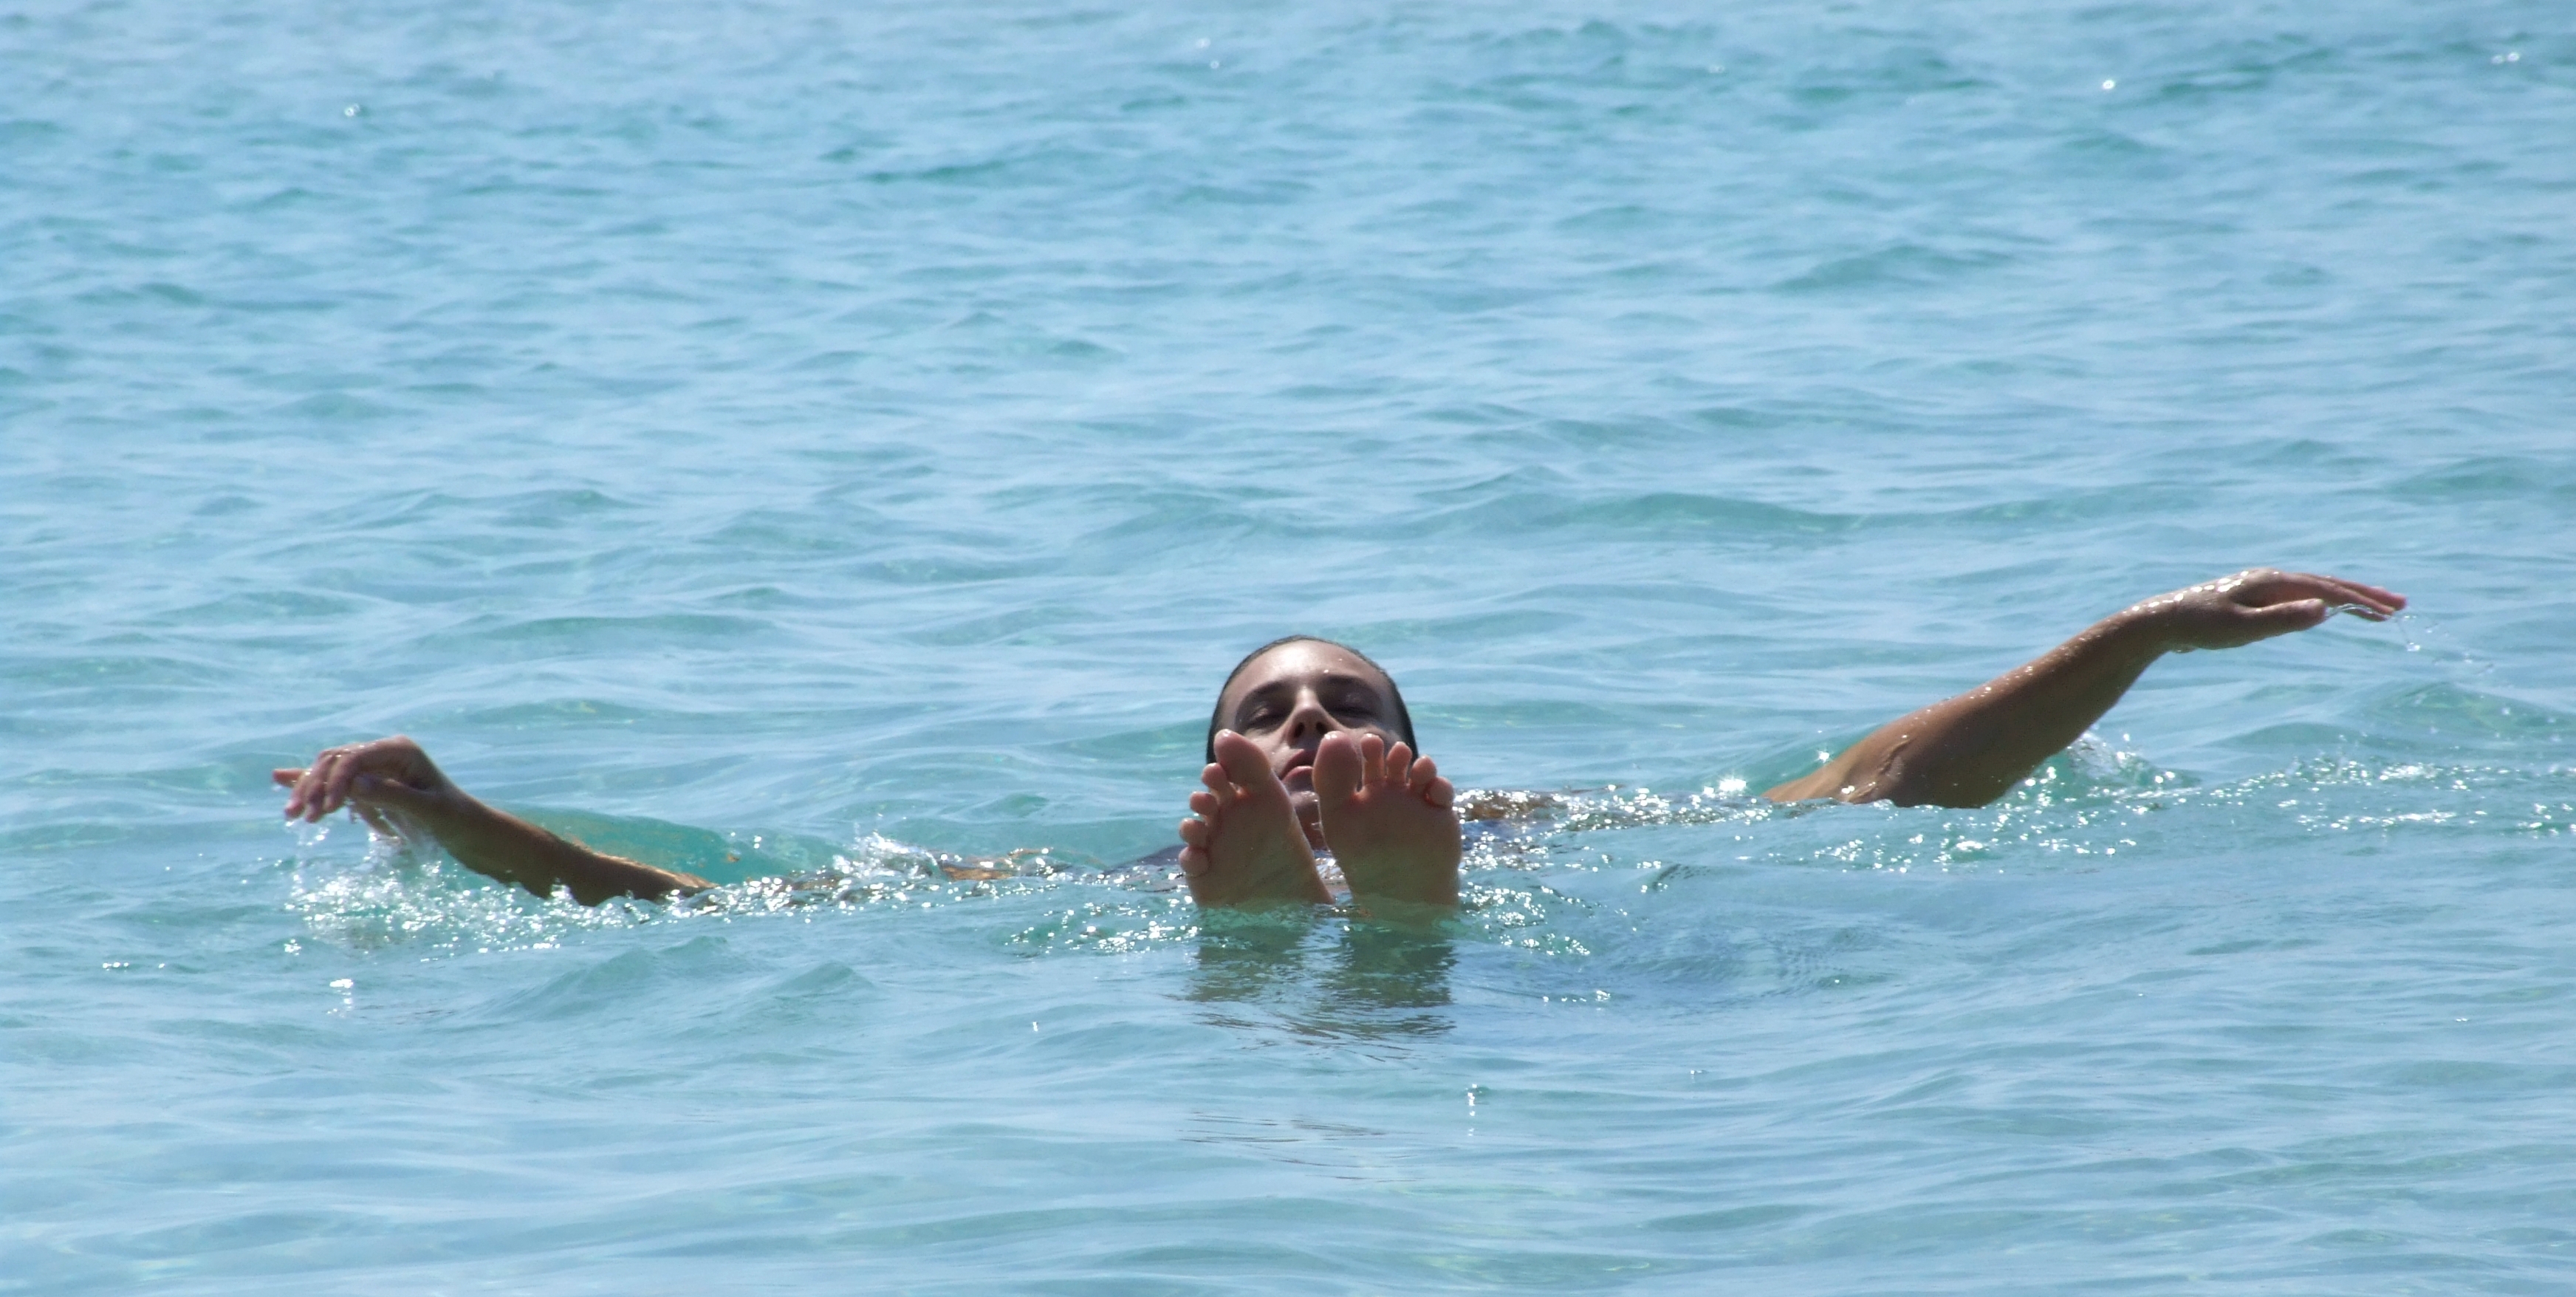 Swimming in the sea - fontane bianche siracusa italy - creative commons by gnuckx photo